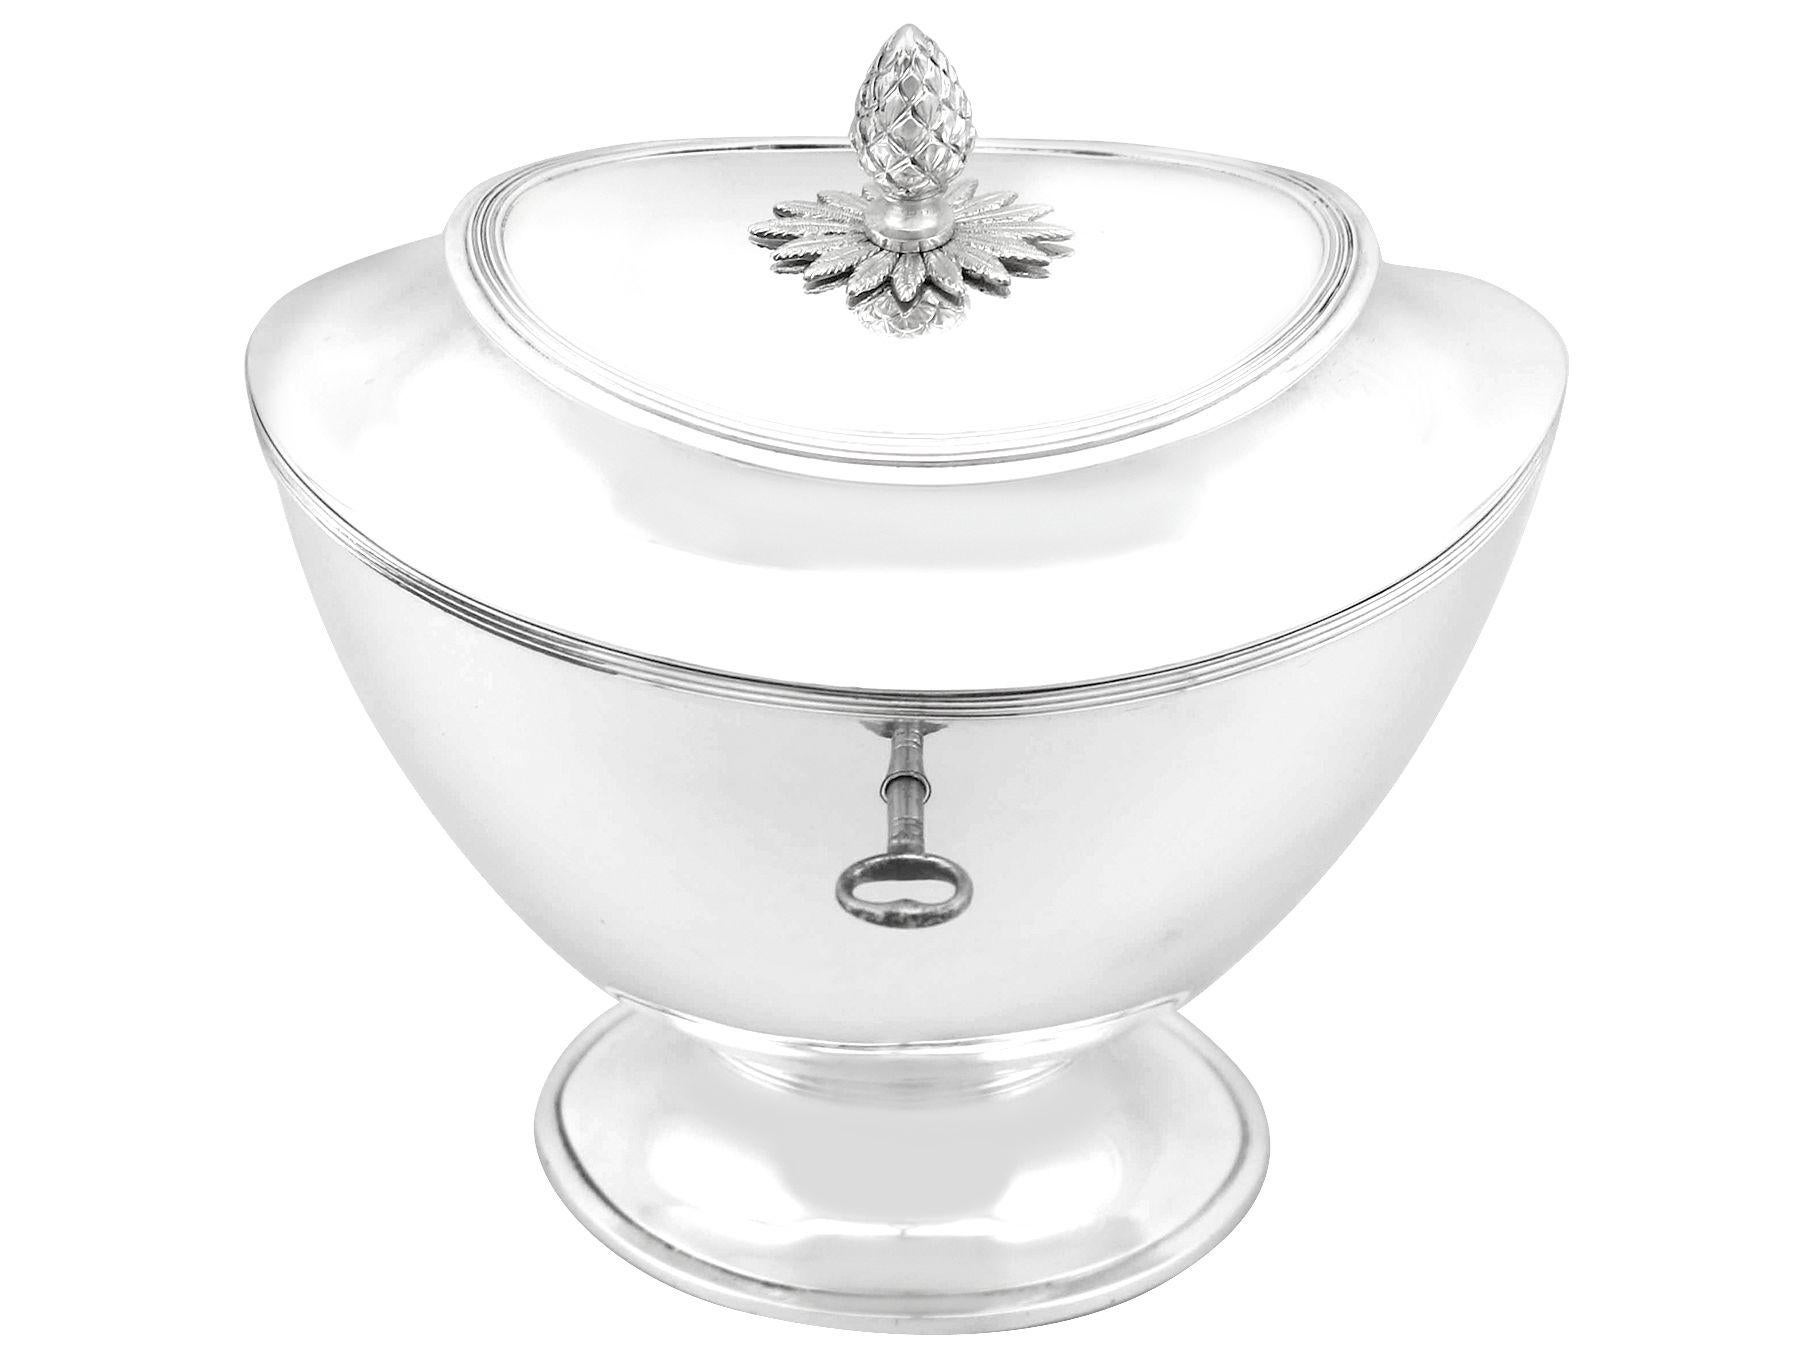 An exceptional, fine and impressive antique Dutch silver tea caddy; an addition to our silver teaware collection.

This exceptional antique Dutch silver tea caddy has an oval urn shaped form onto an oval pedestal foot.

The surface of this 19th